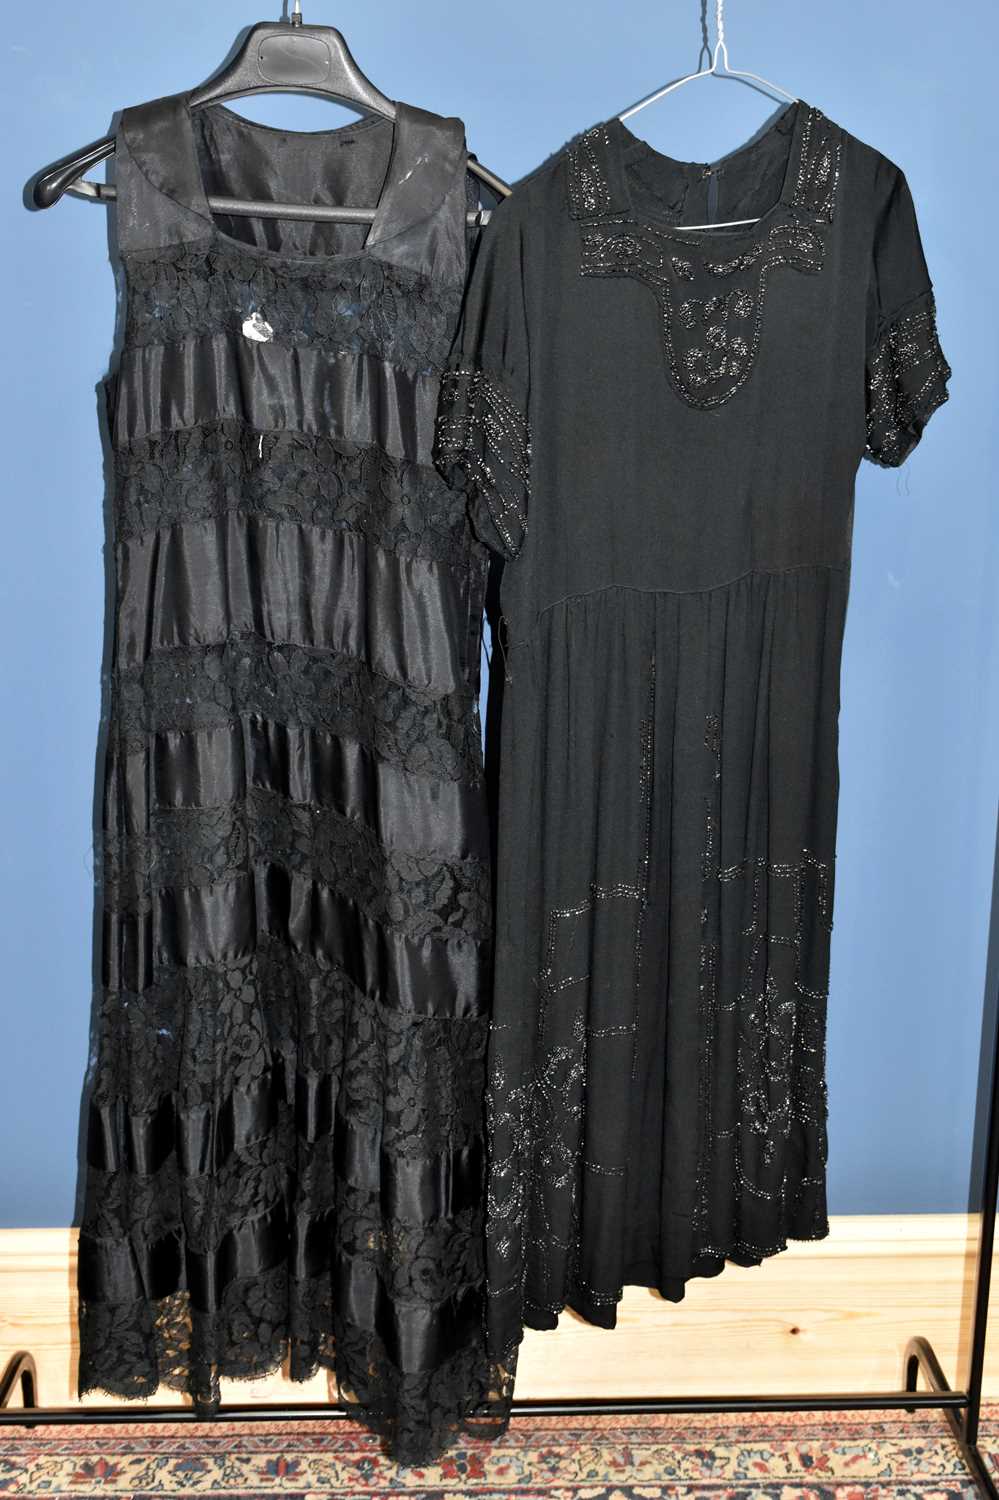 A black sequinned full length 1920s flapper dress style tunic with an electric blue sequin design, - Image 3 of 3